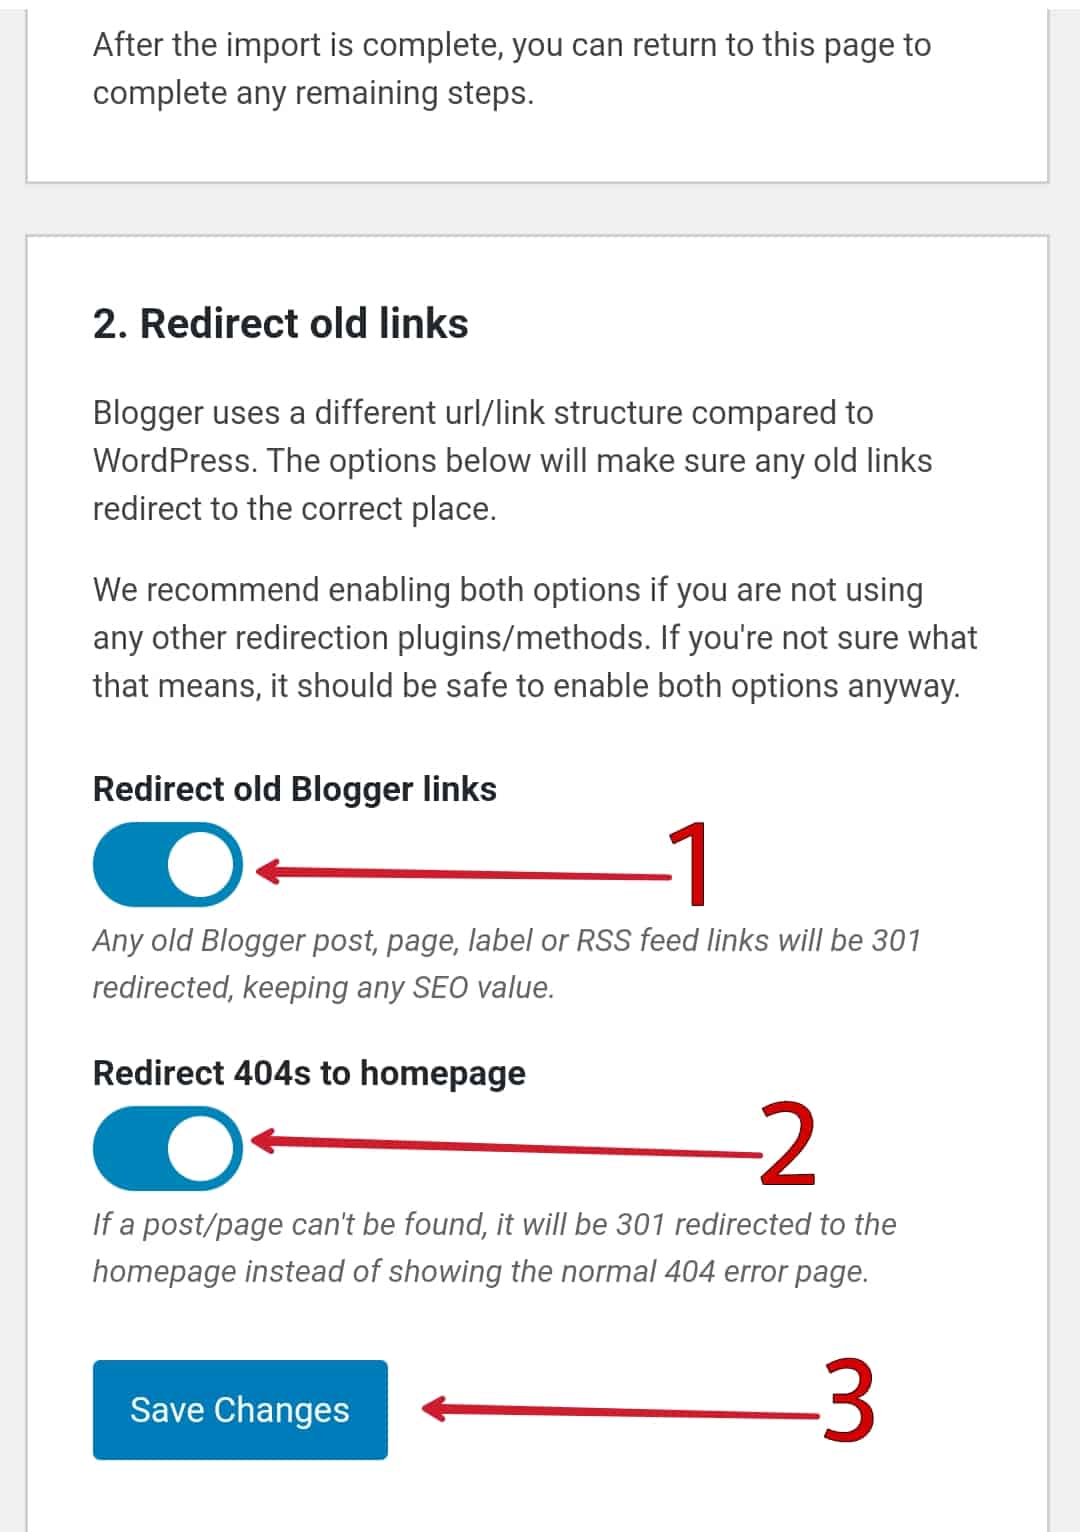 Enable Redirect old Blogger links & Redirect 404s to homepage